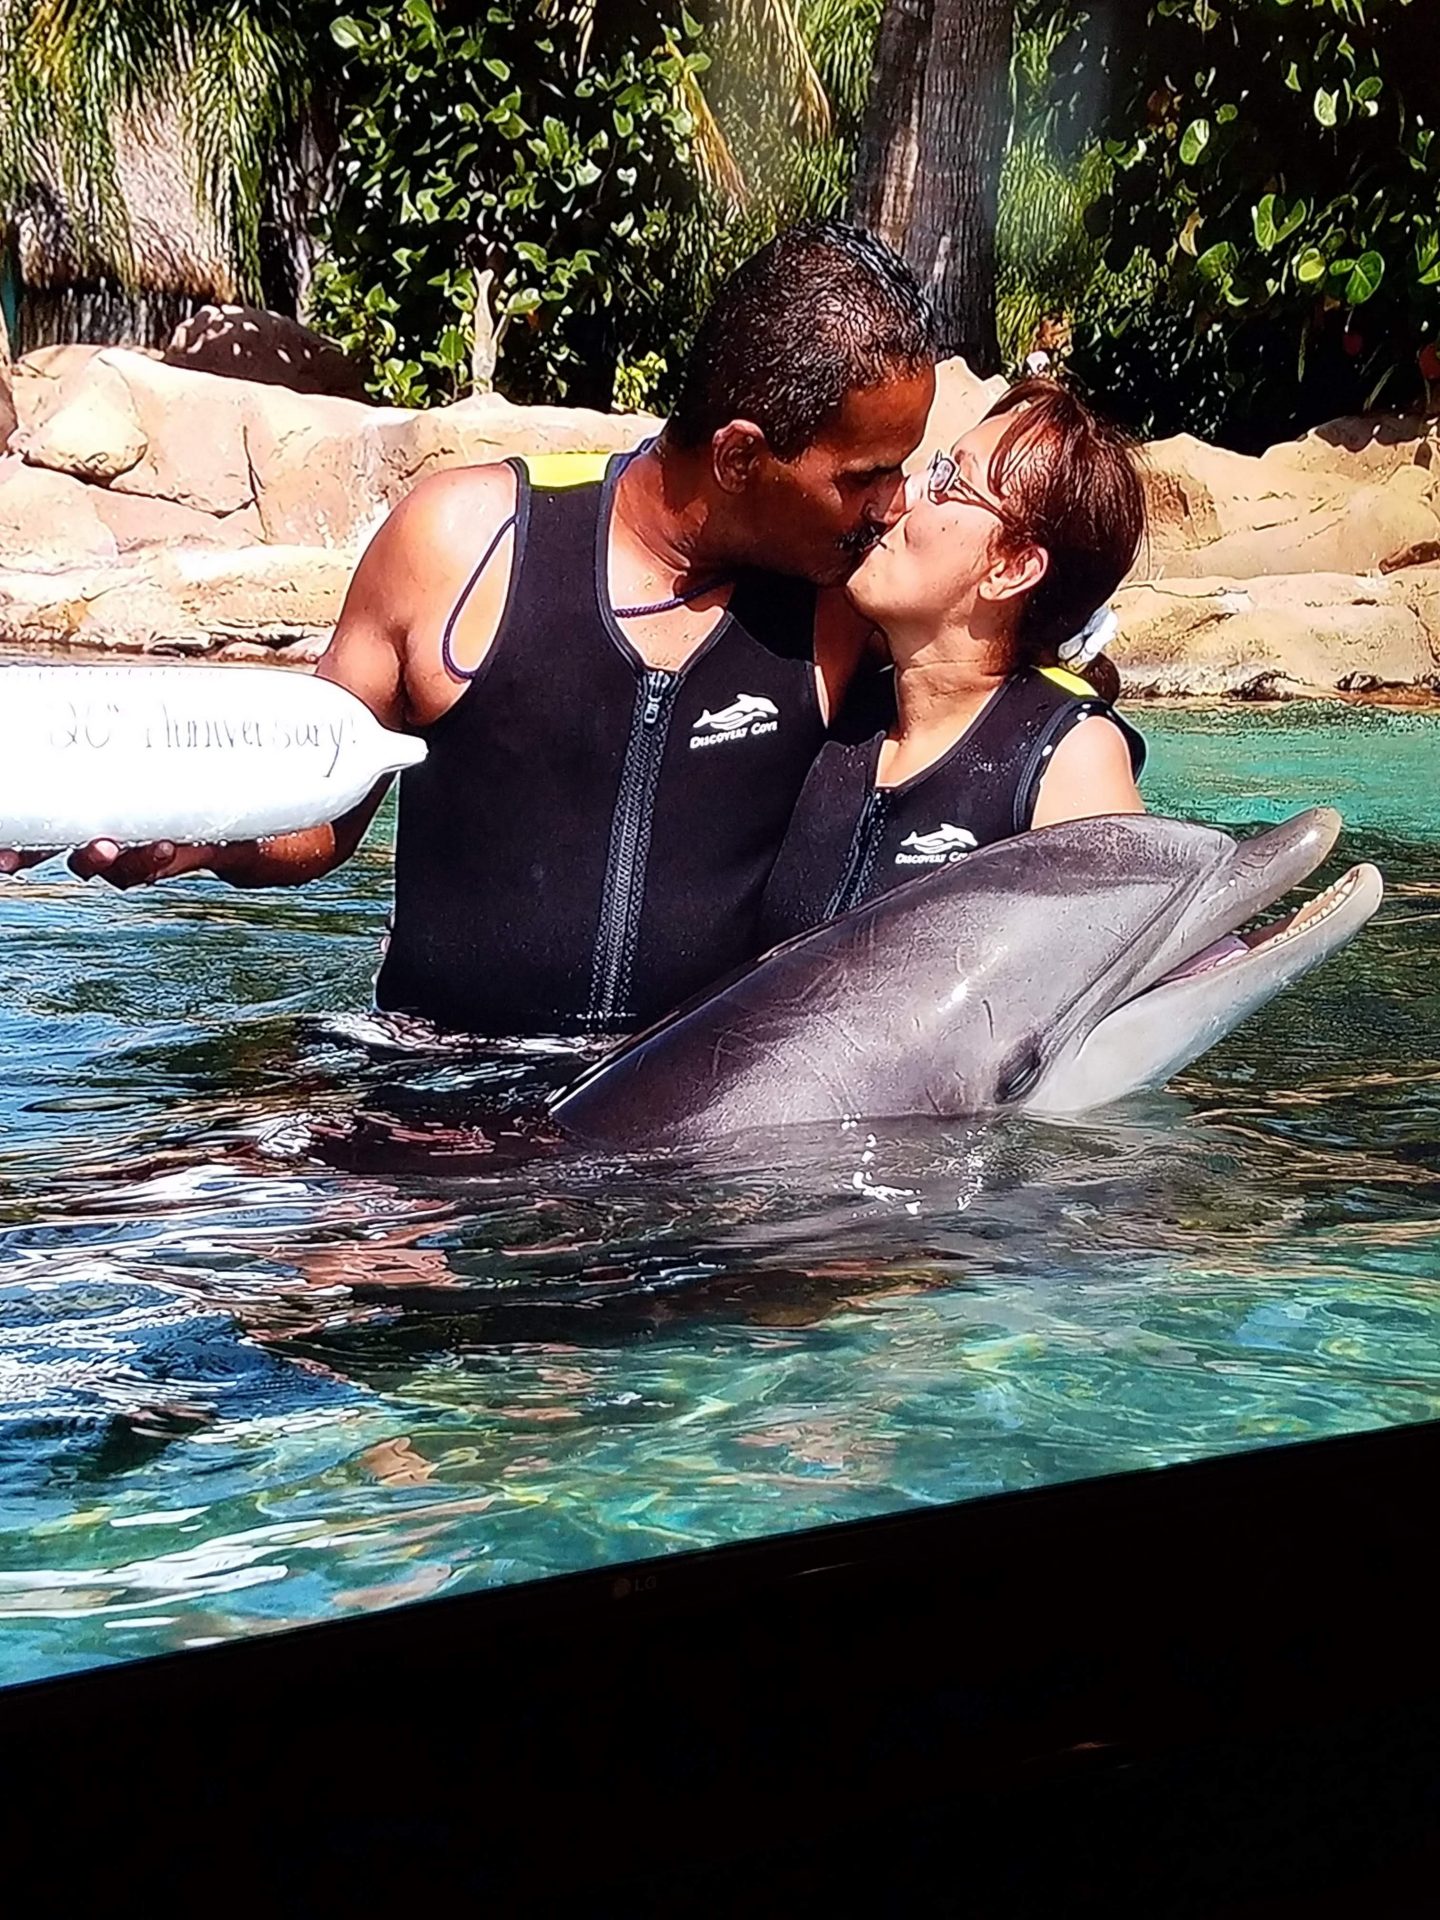 Our 20th Anniversary. We had so much fun at Discovery Cove. I could not swim, you kept holding me up. Love you, God please take care of my husband.